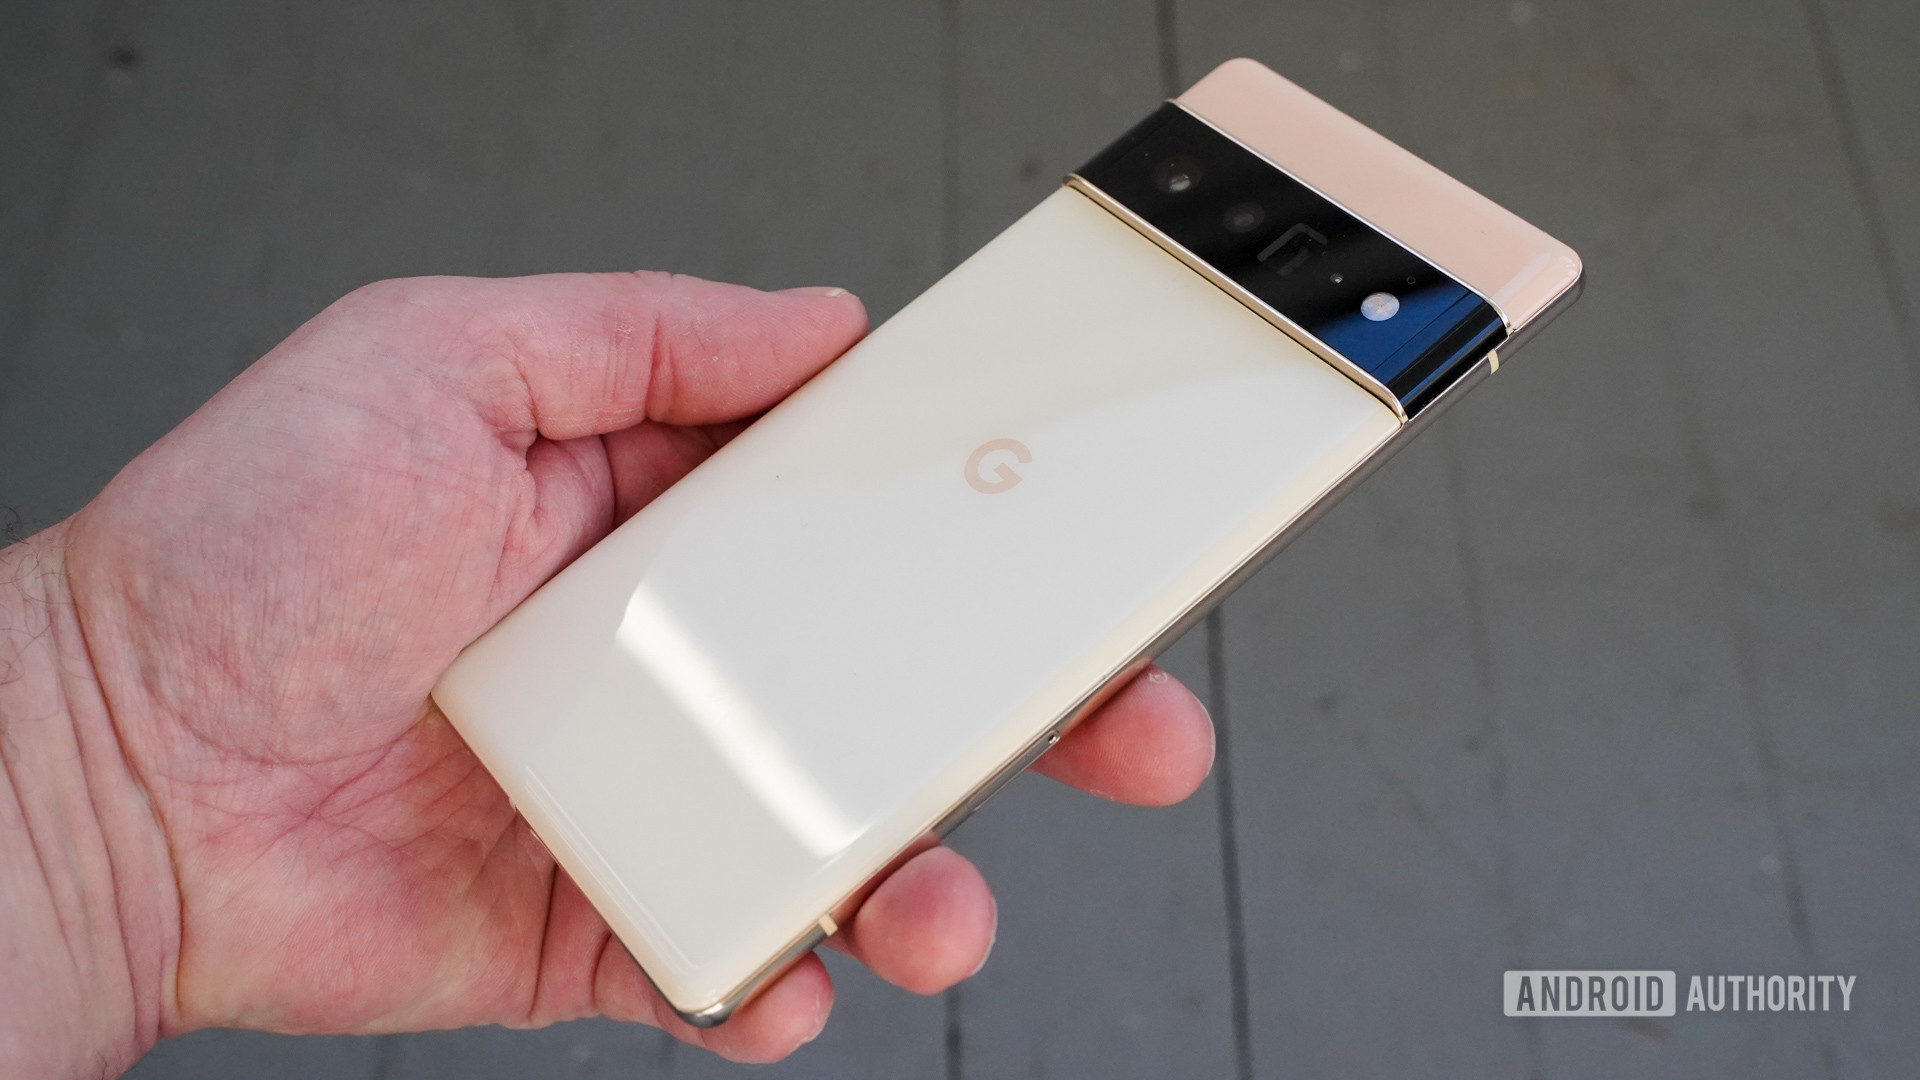 Google Pixel 6 Pro right angle view in hand